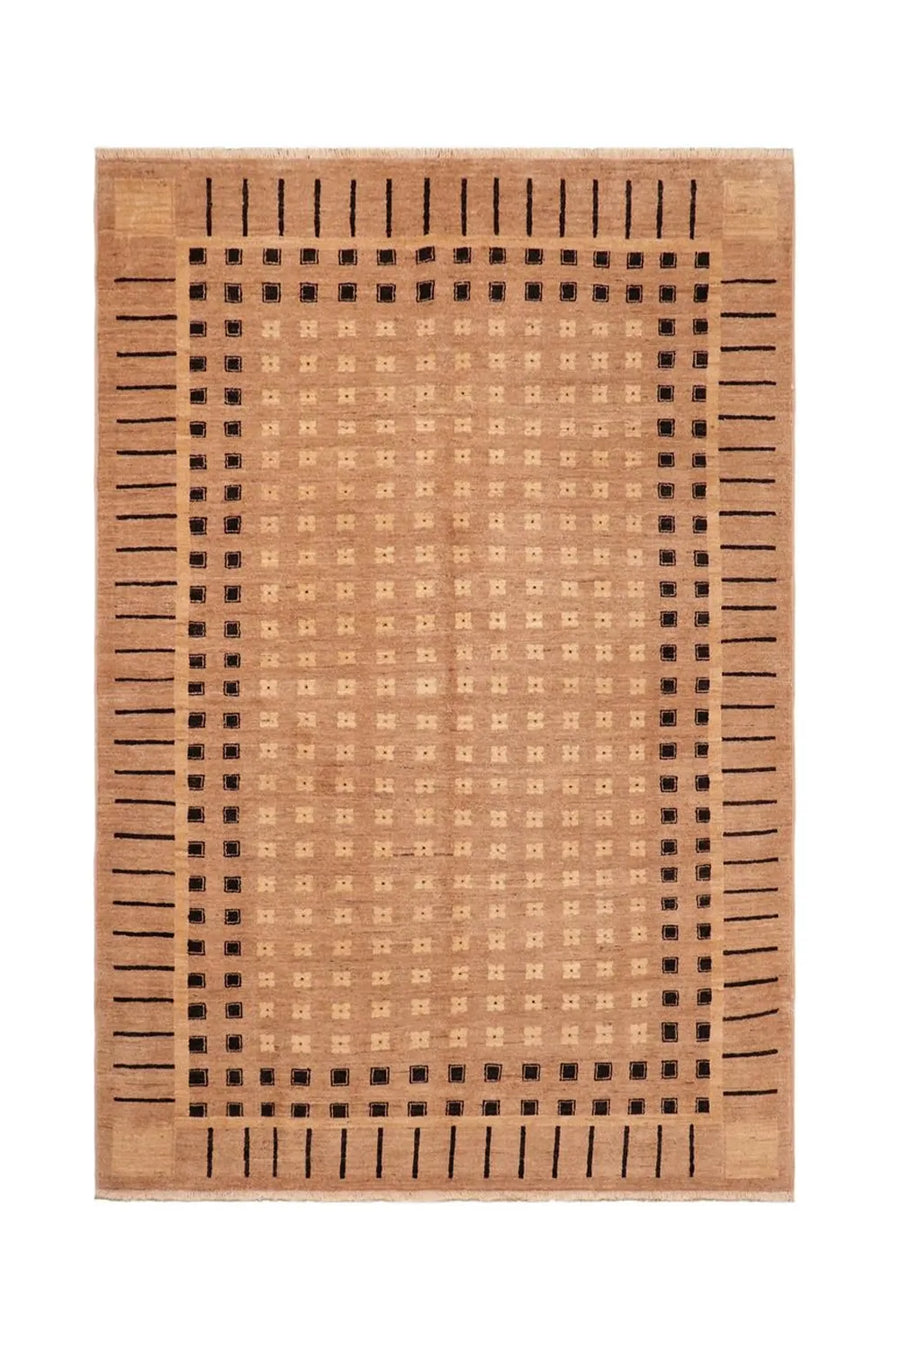 Mid Century Modern Turkish rug with a striking pattern in tan, black, and beige.